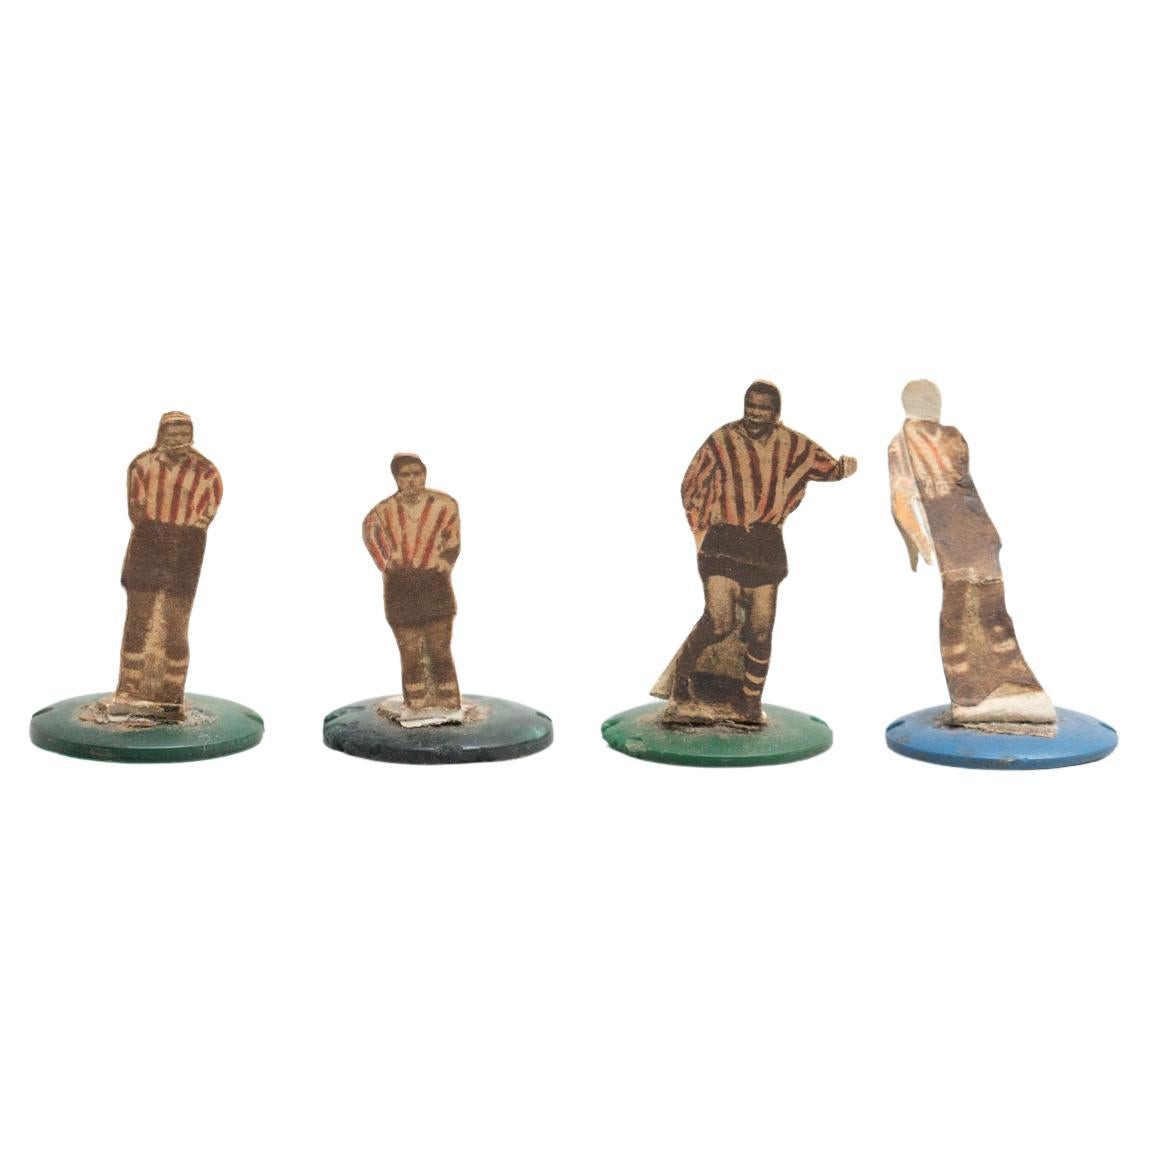 Set of 4 Traditional Antique Button Soccer Game Figures, circa 1950 For Sale